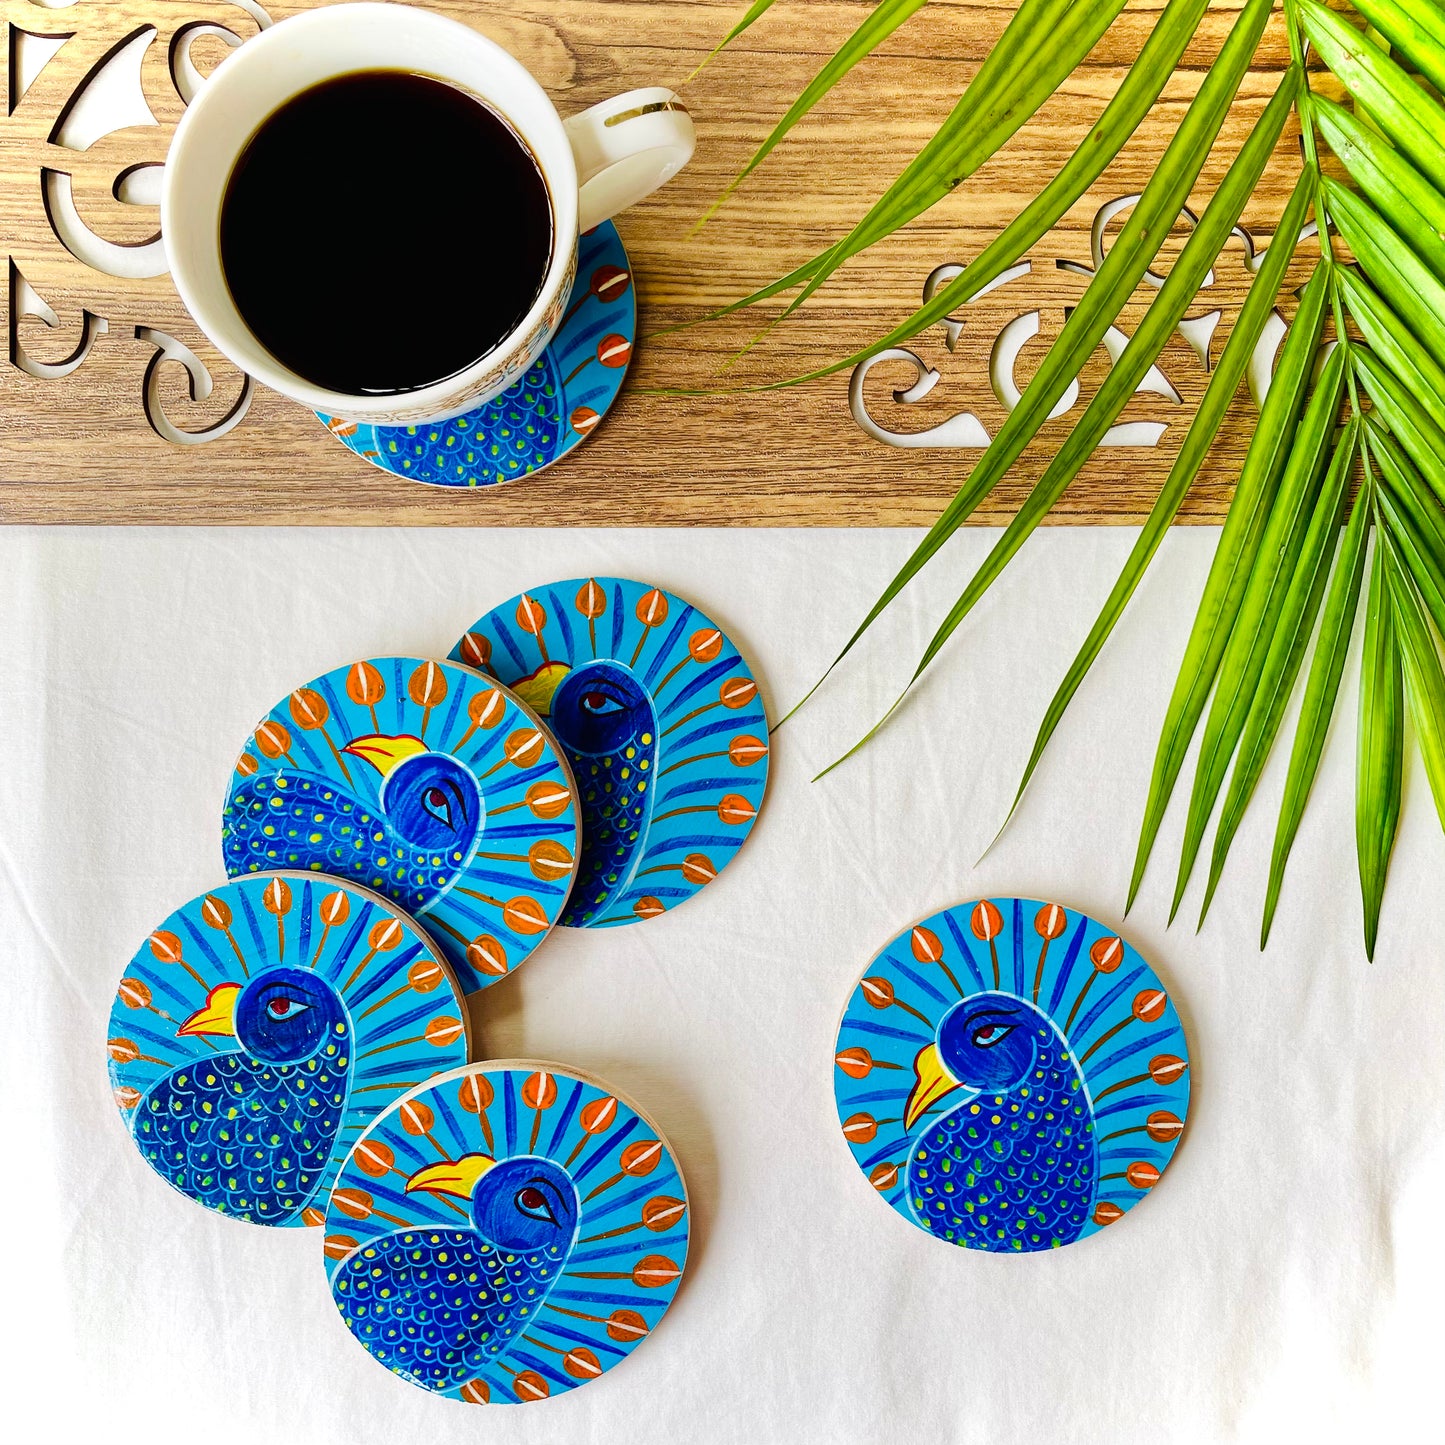 Alokya - 100% natural, Pattachitra painted terracotta coasters Round coasters: blue bird painted on the surface.